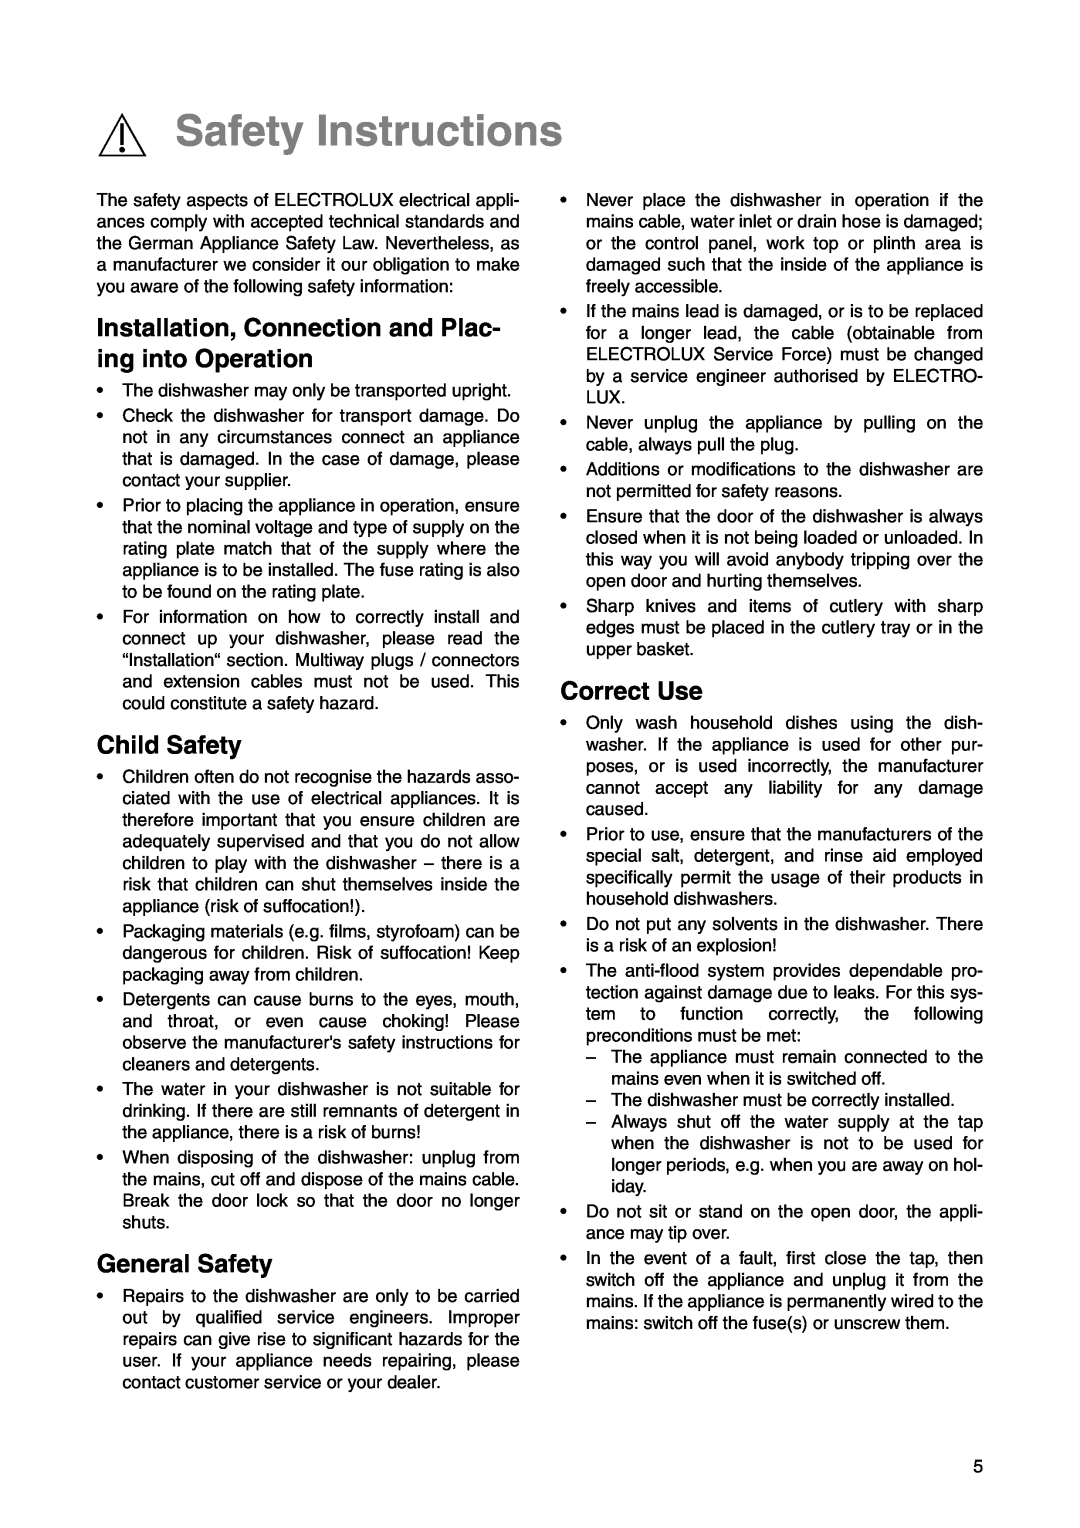 Electrolux ESL 6225 Safety Instructions, Installation, Connection and Plac- ing into Operation, Child Safety, Correct Use 